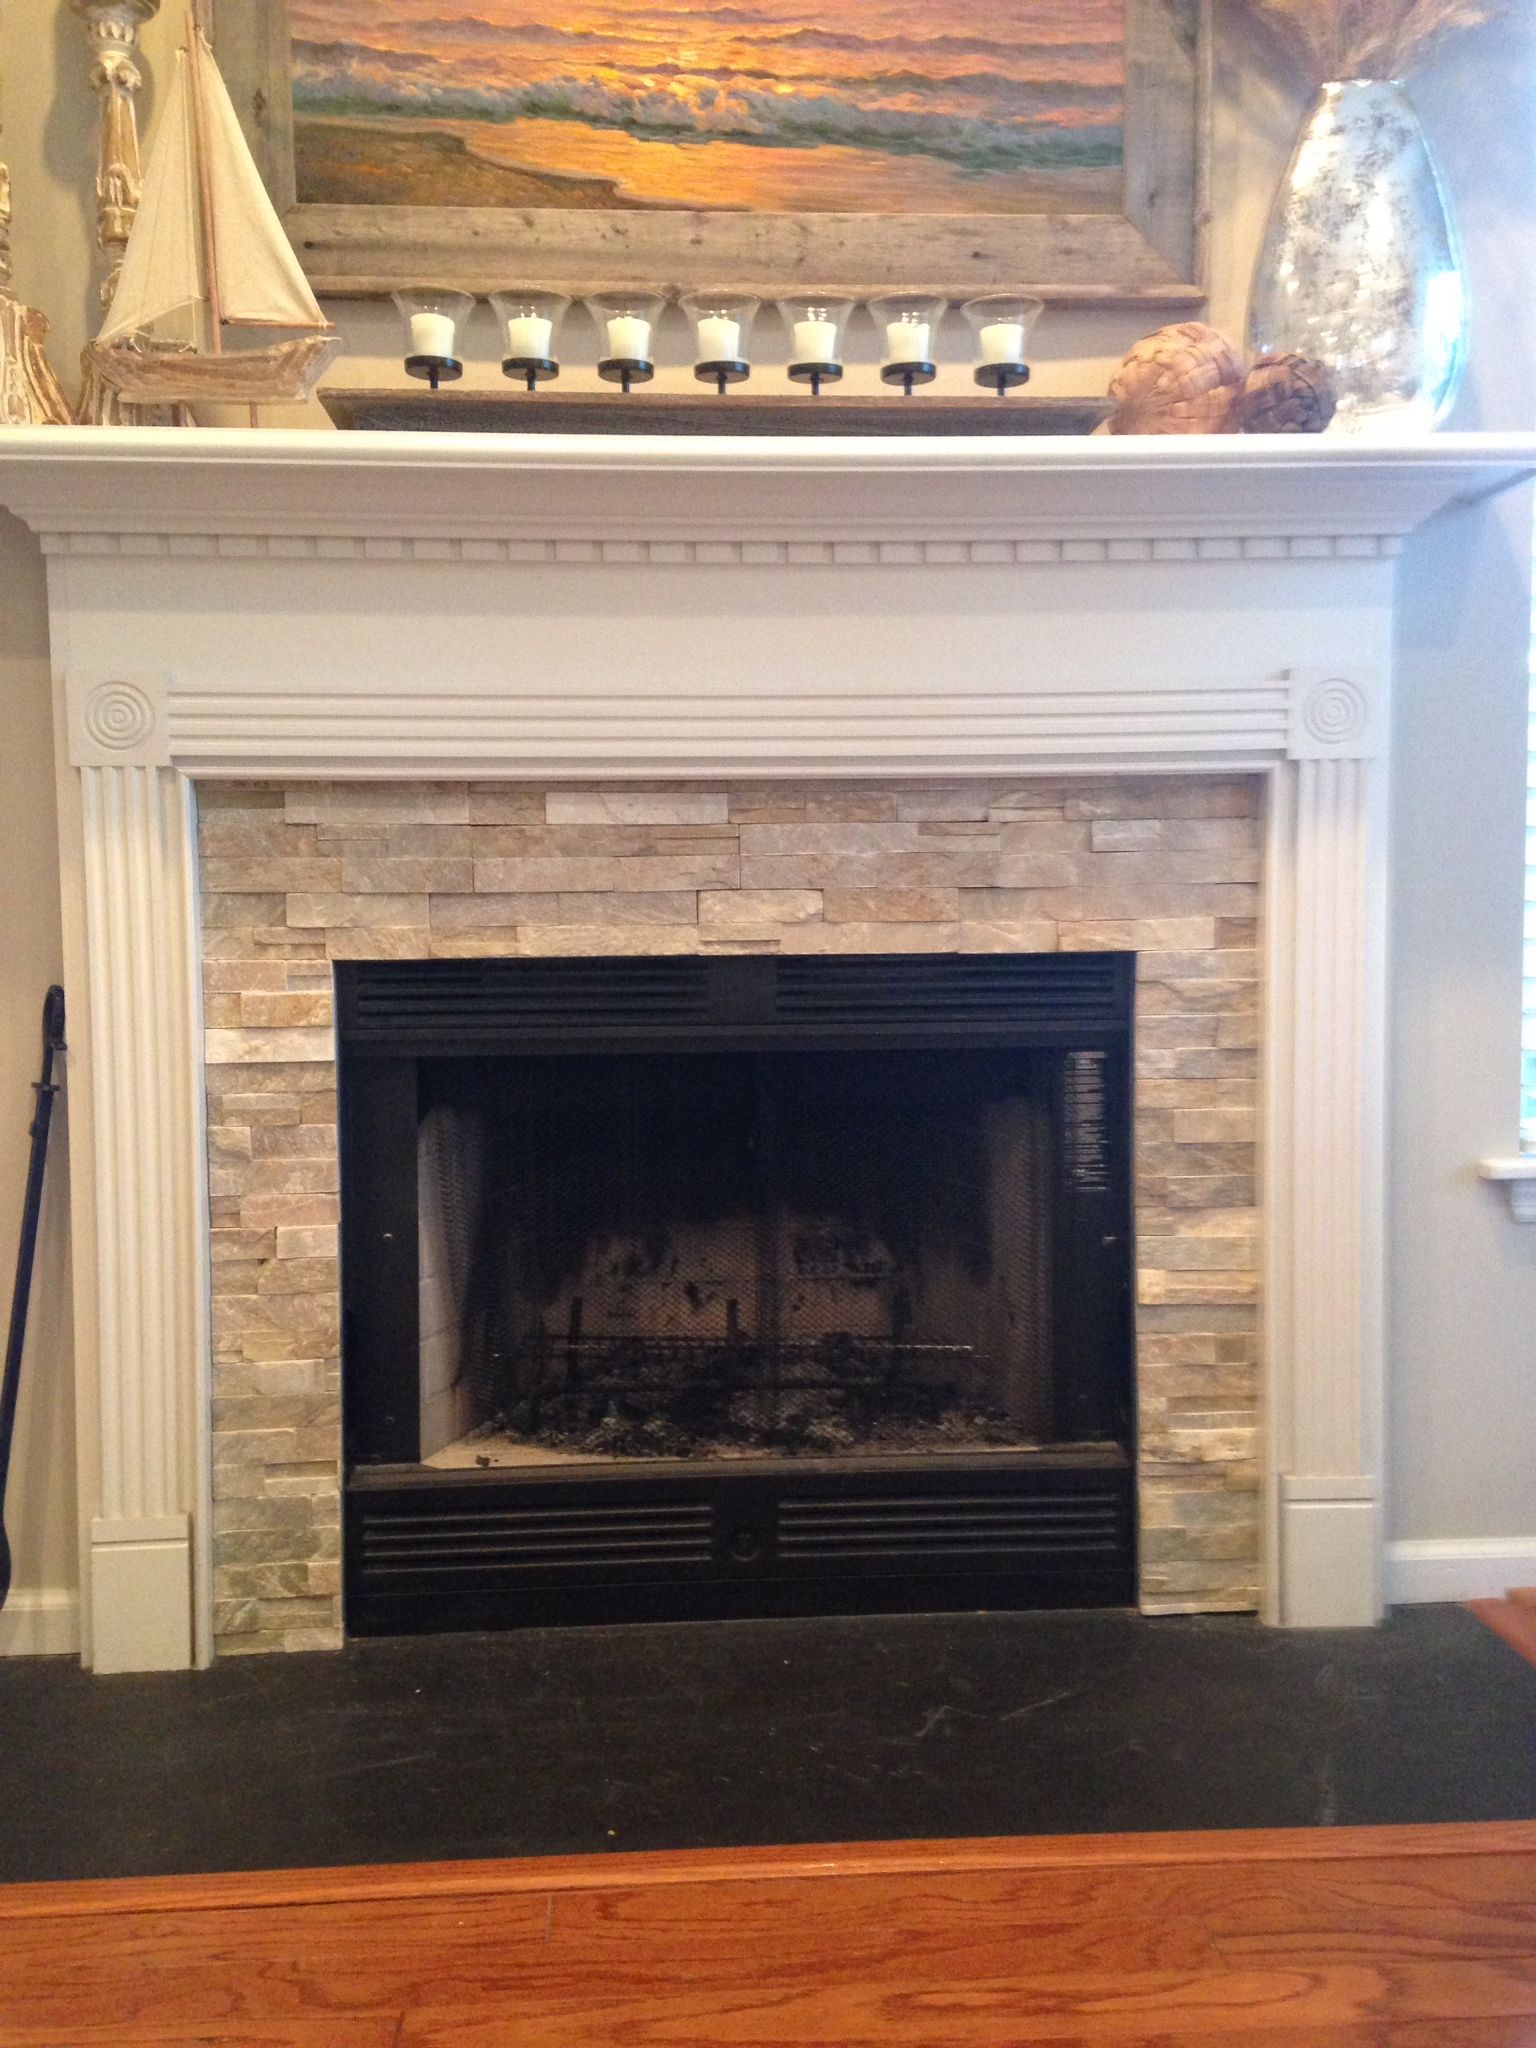 Fireplace Hearth Images Lovely Fireplace Idea Mantel Wainscoting Design Craftsman